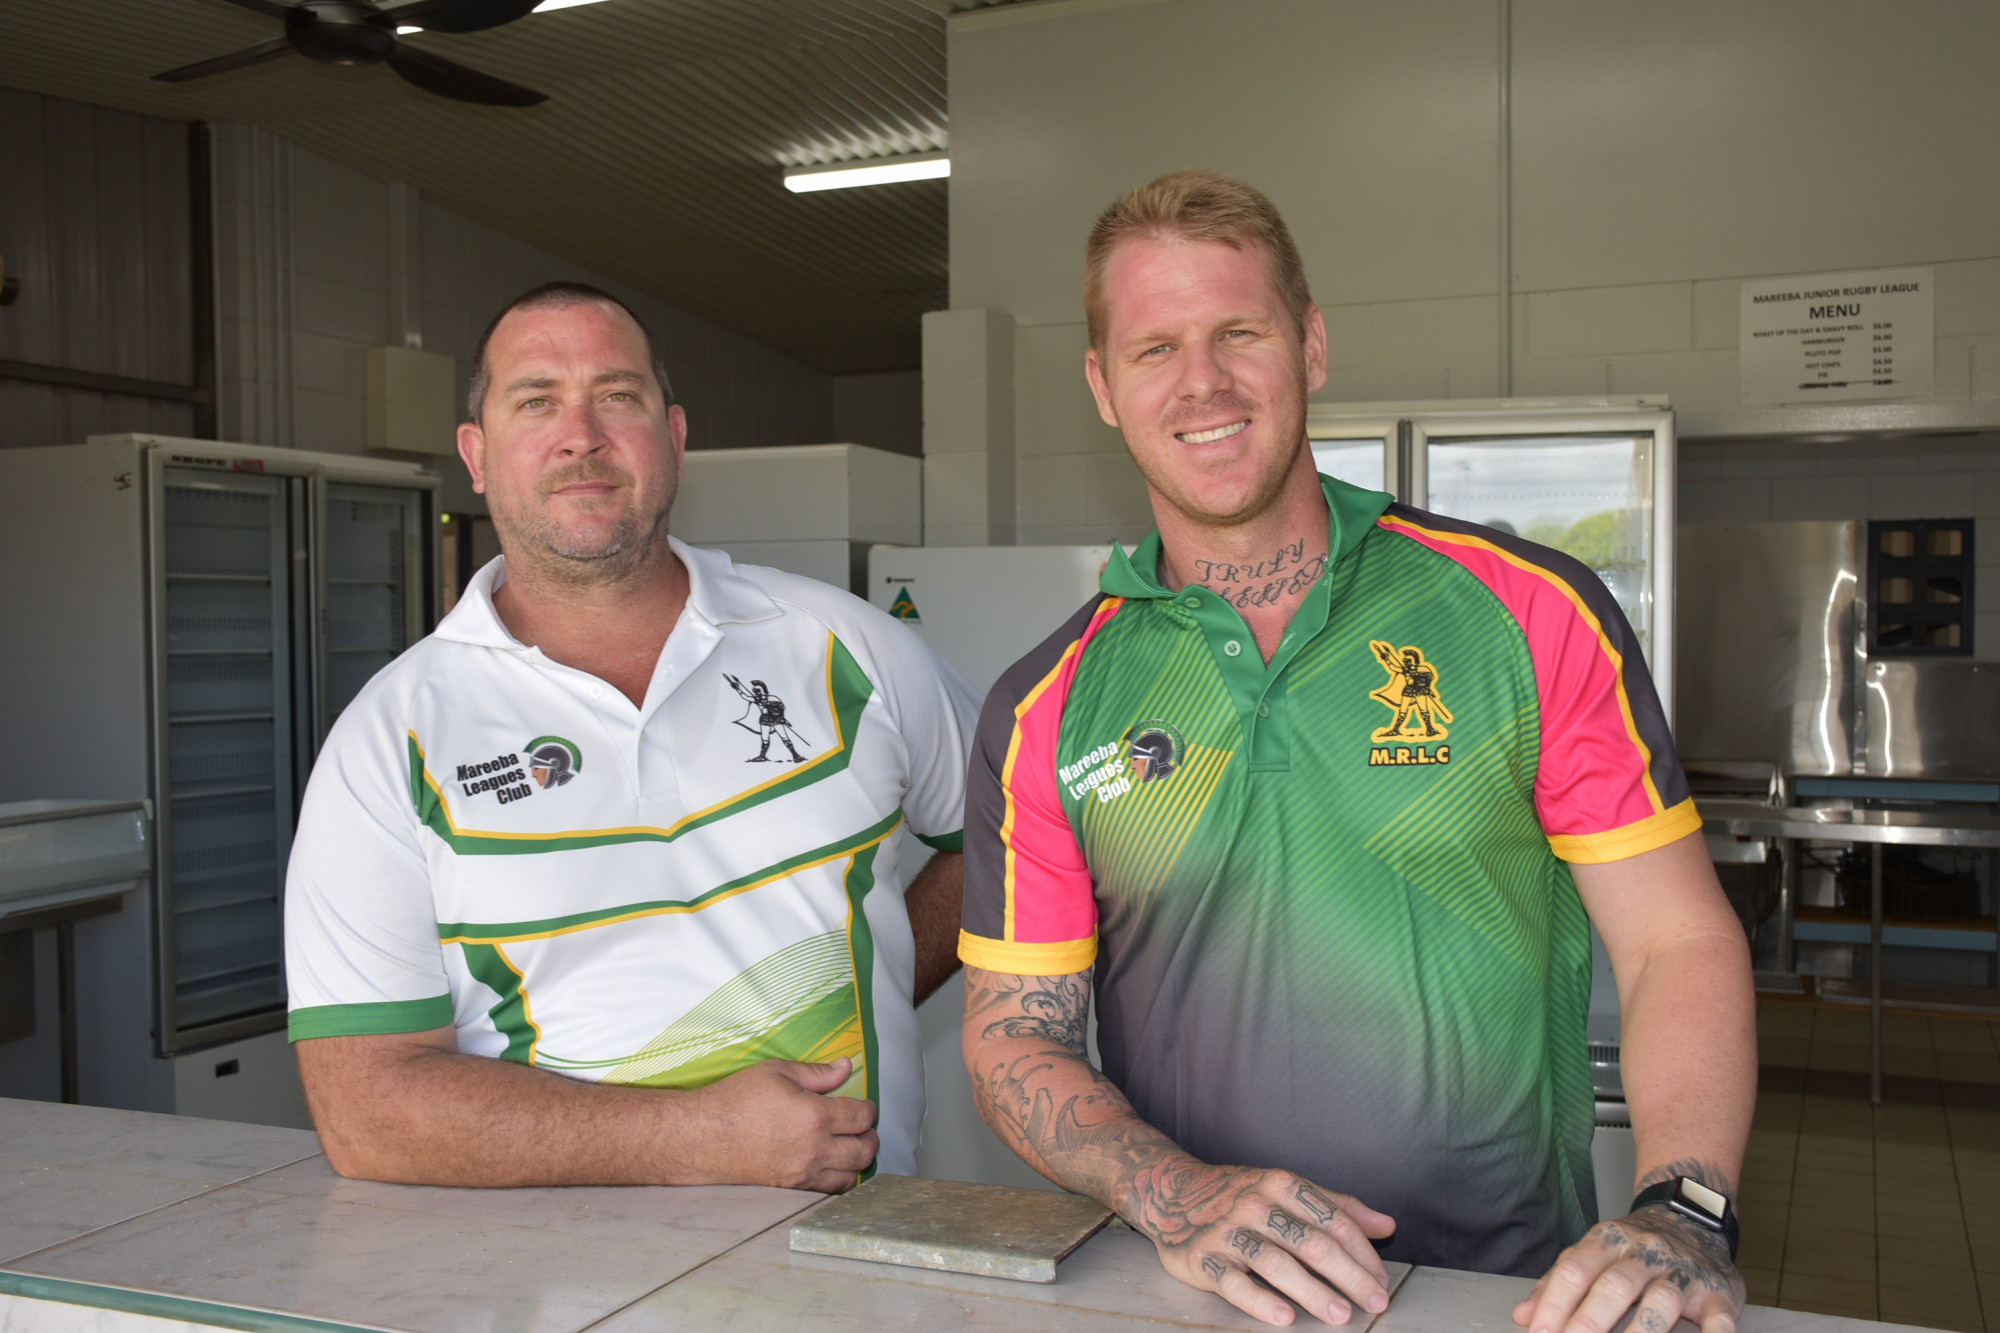 New Mareeba Gladiators President Daryl Fraser and Captain Coach Trent Barnard are both looking forward to the 2021 season with a new committee on board.